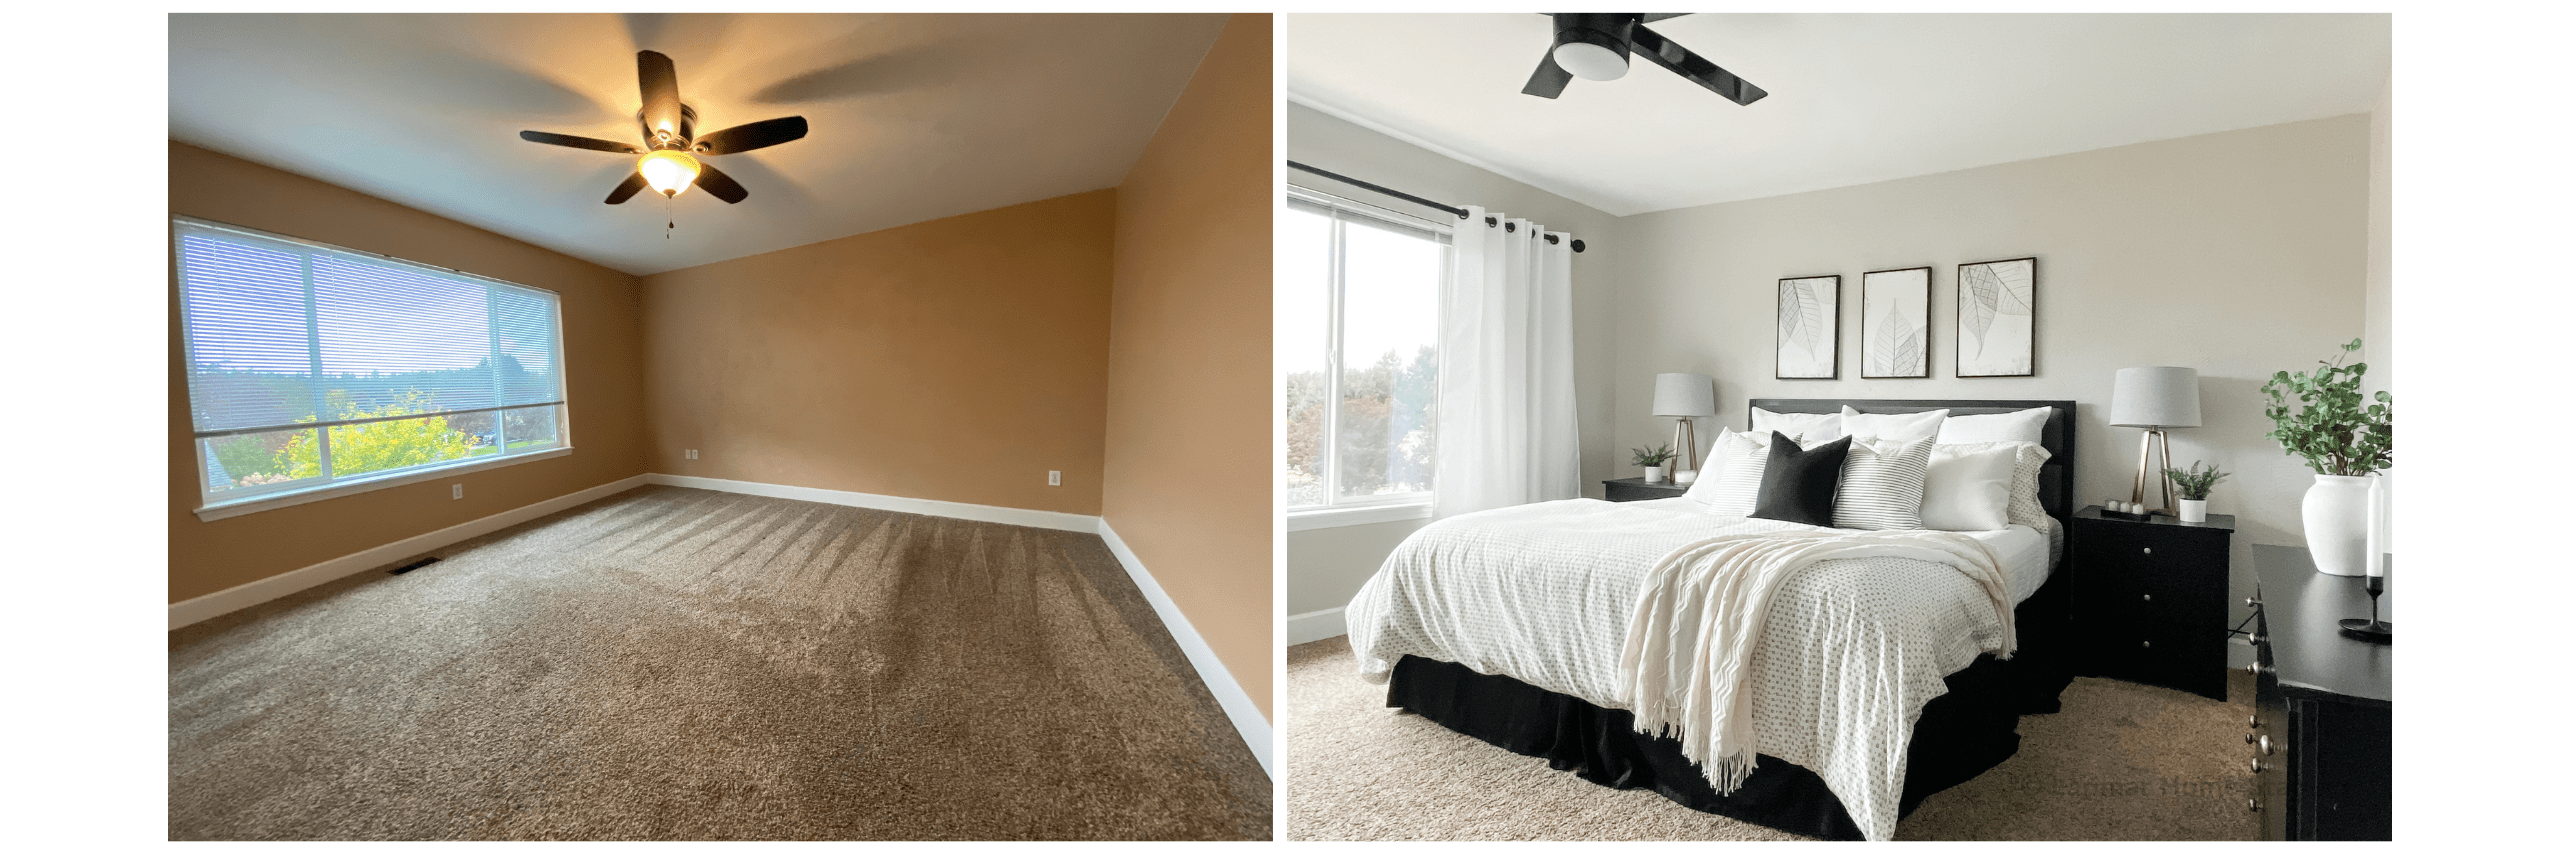 Before and After Home Staging Bedroom